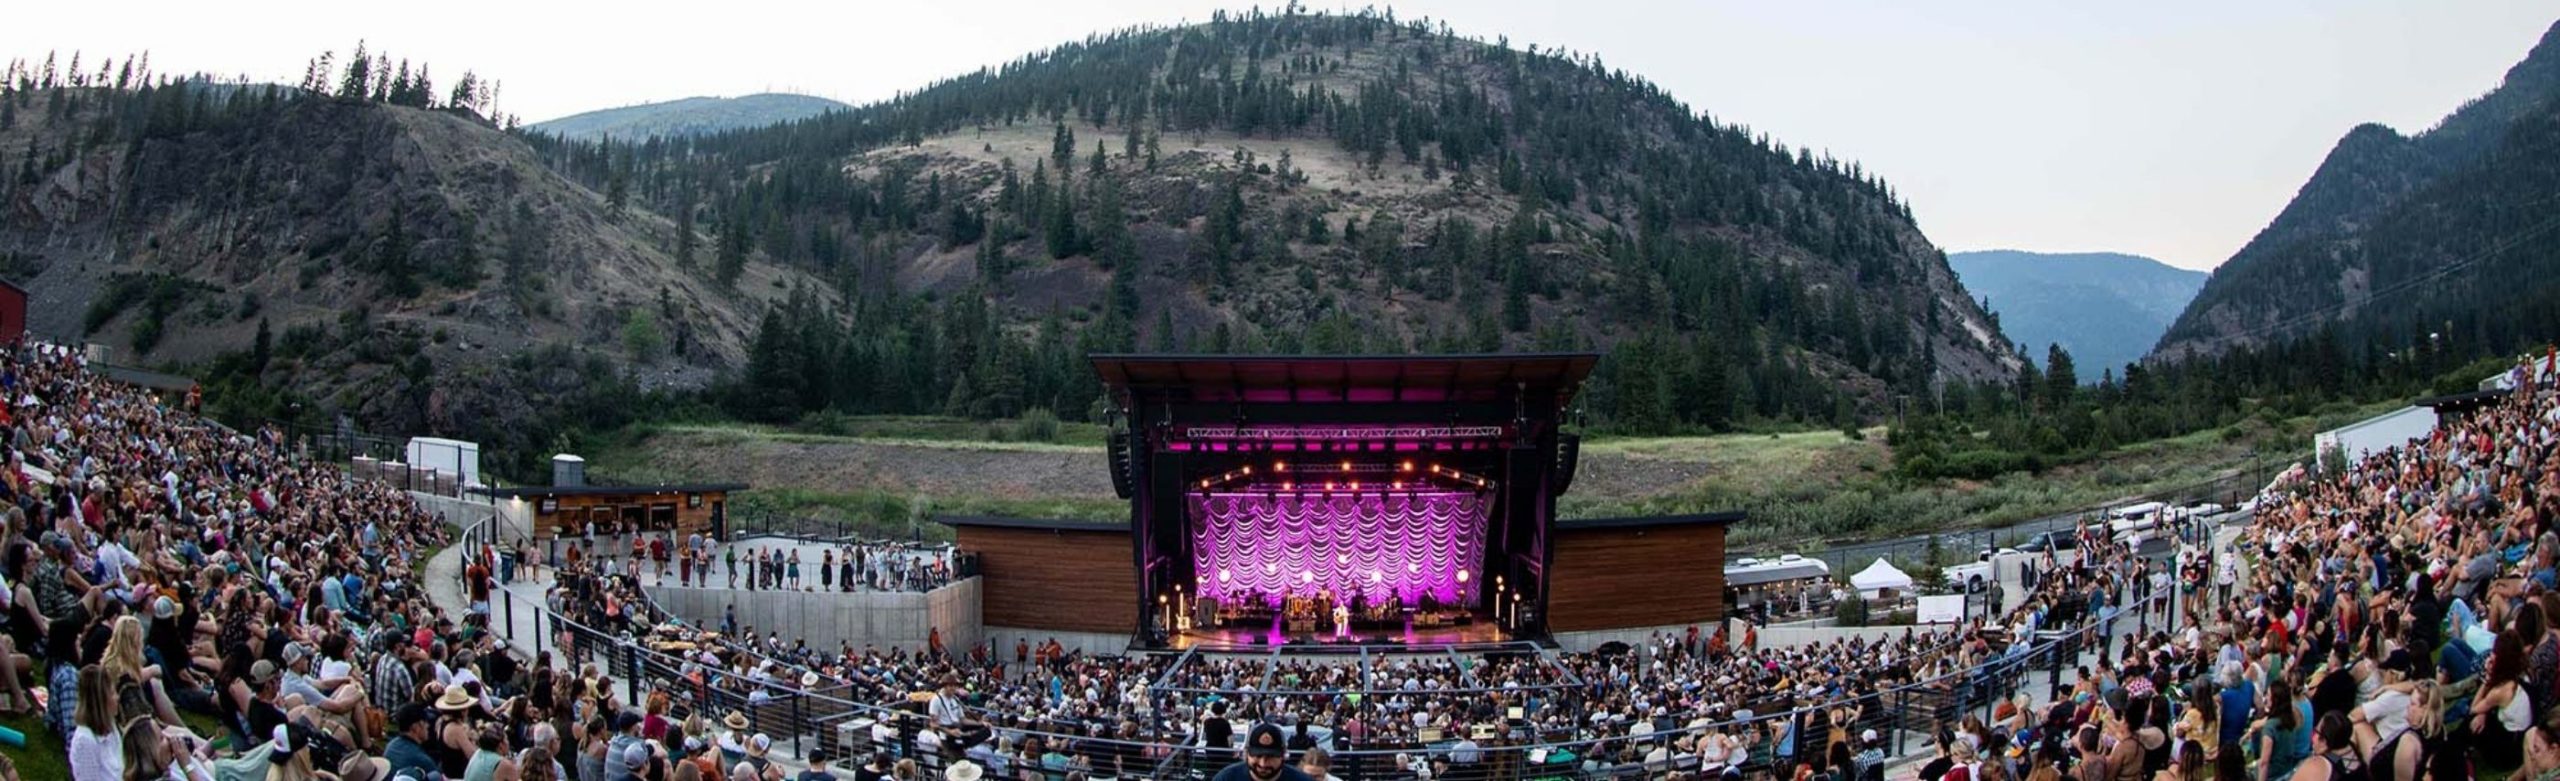 KettleHouse Amphitheater Nominated for Outdoor Concert Venue of The Year Image